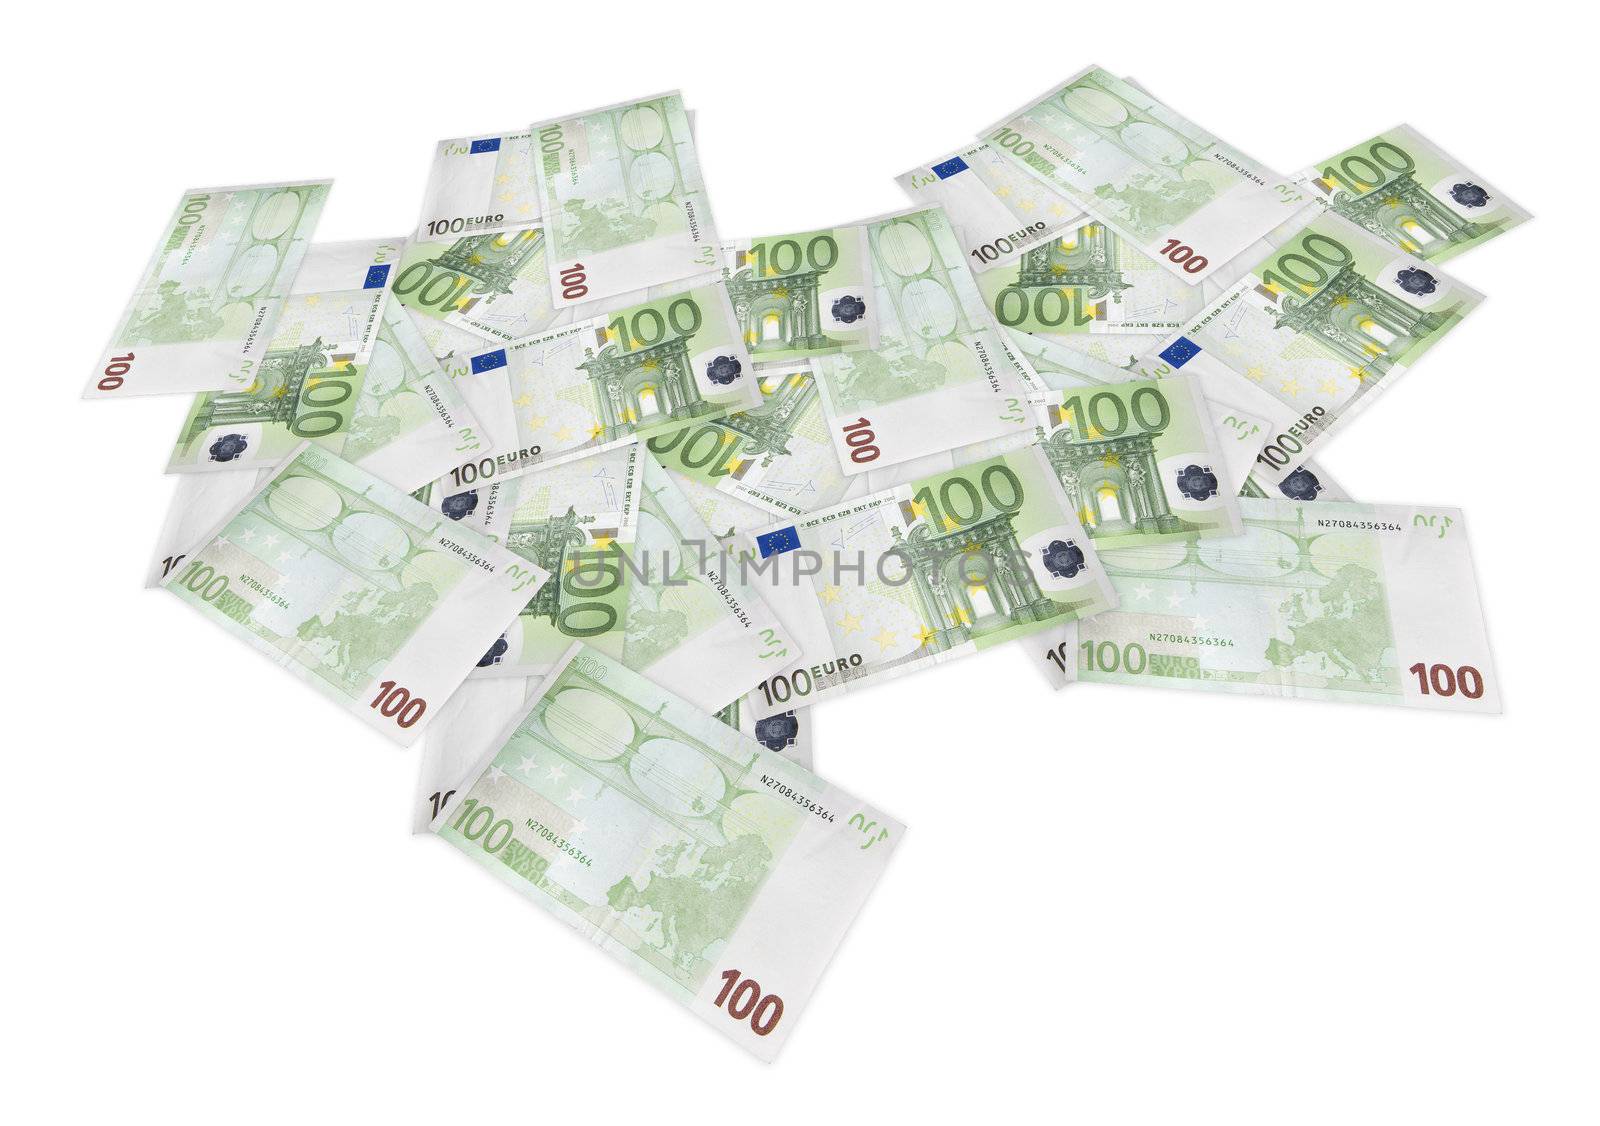 Isolated spread euro banknotes by domencolja